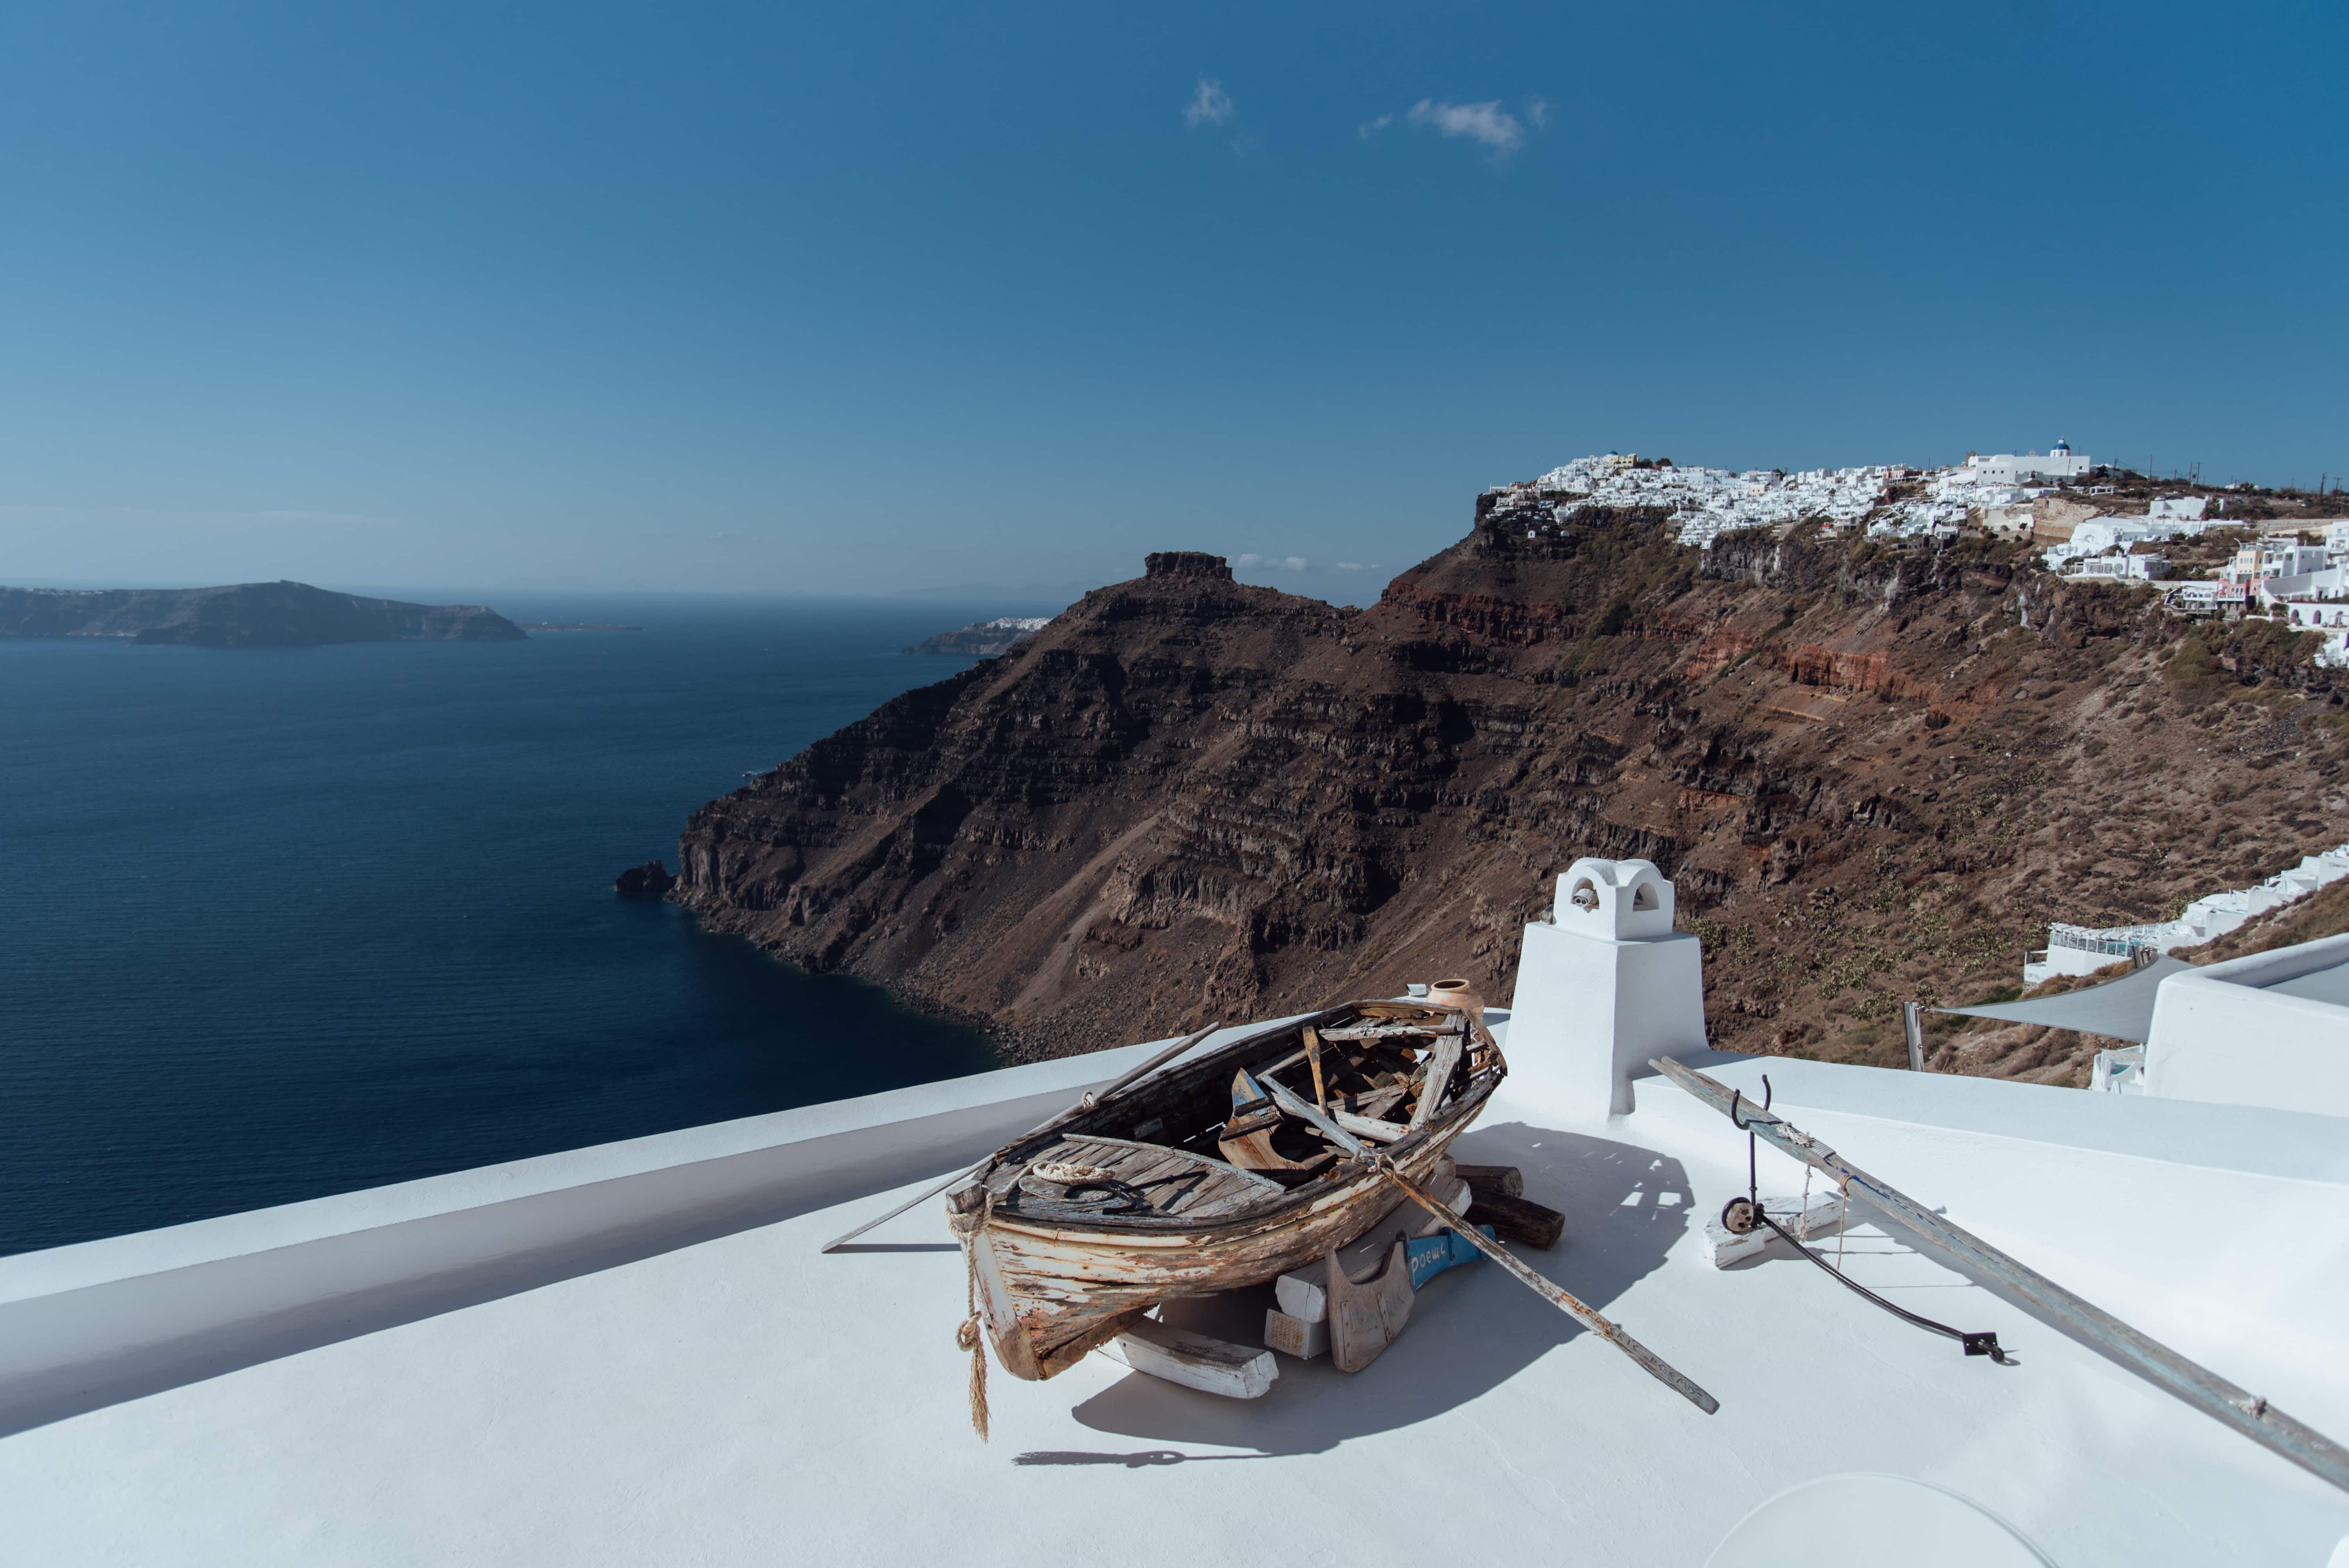 How To Get From Santorini Airport To Imerovigli - All Possible Ways, cheapest way from Santorini airport to Imerovigli, Santorini airport to Imerovigli, cheapest way from Santorini airport to Imerovigli town, Santorini Bus Airport, bus from Santorini airport to Imerovigli, taxi Santorini airport to Imerovigli, Uber Santorini airport to Imerovigli, Santorini airport to Imerovigli by bus, Santorini Airport Bus to Imerovigli